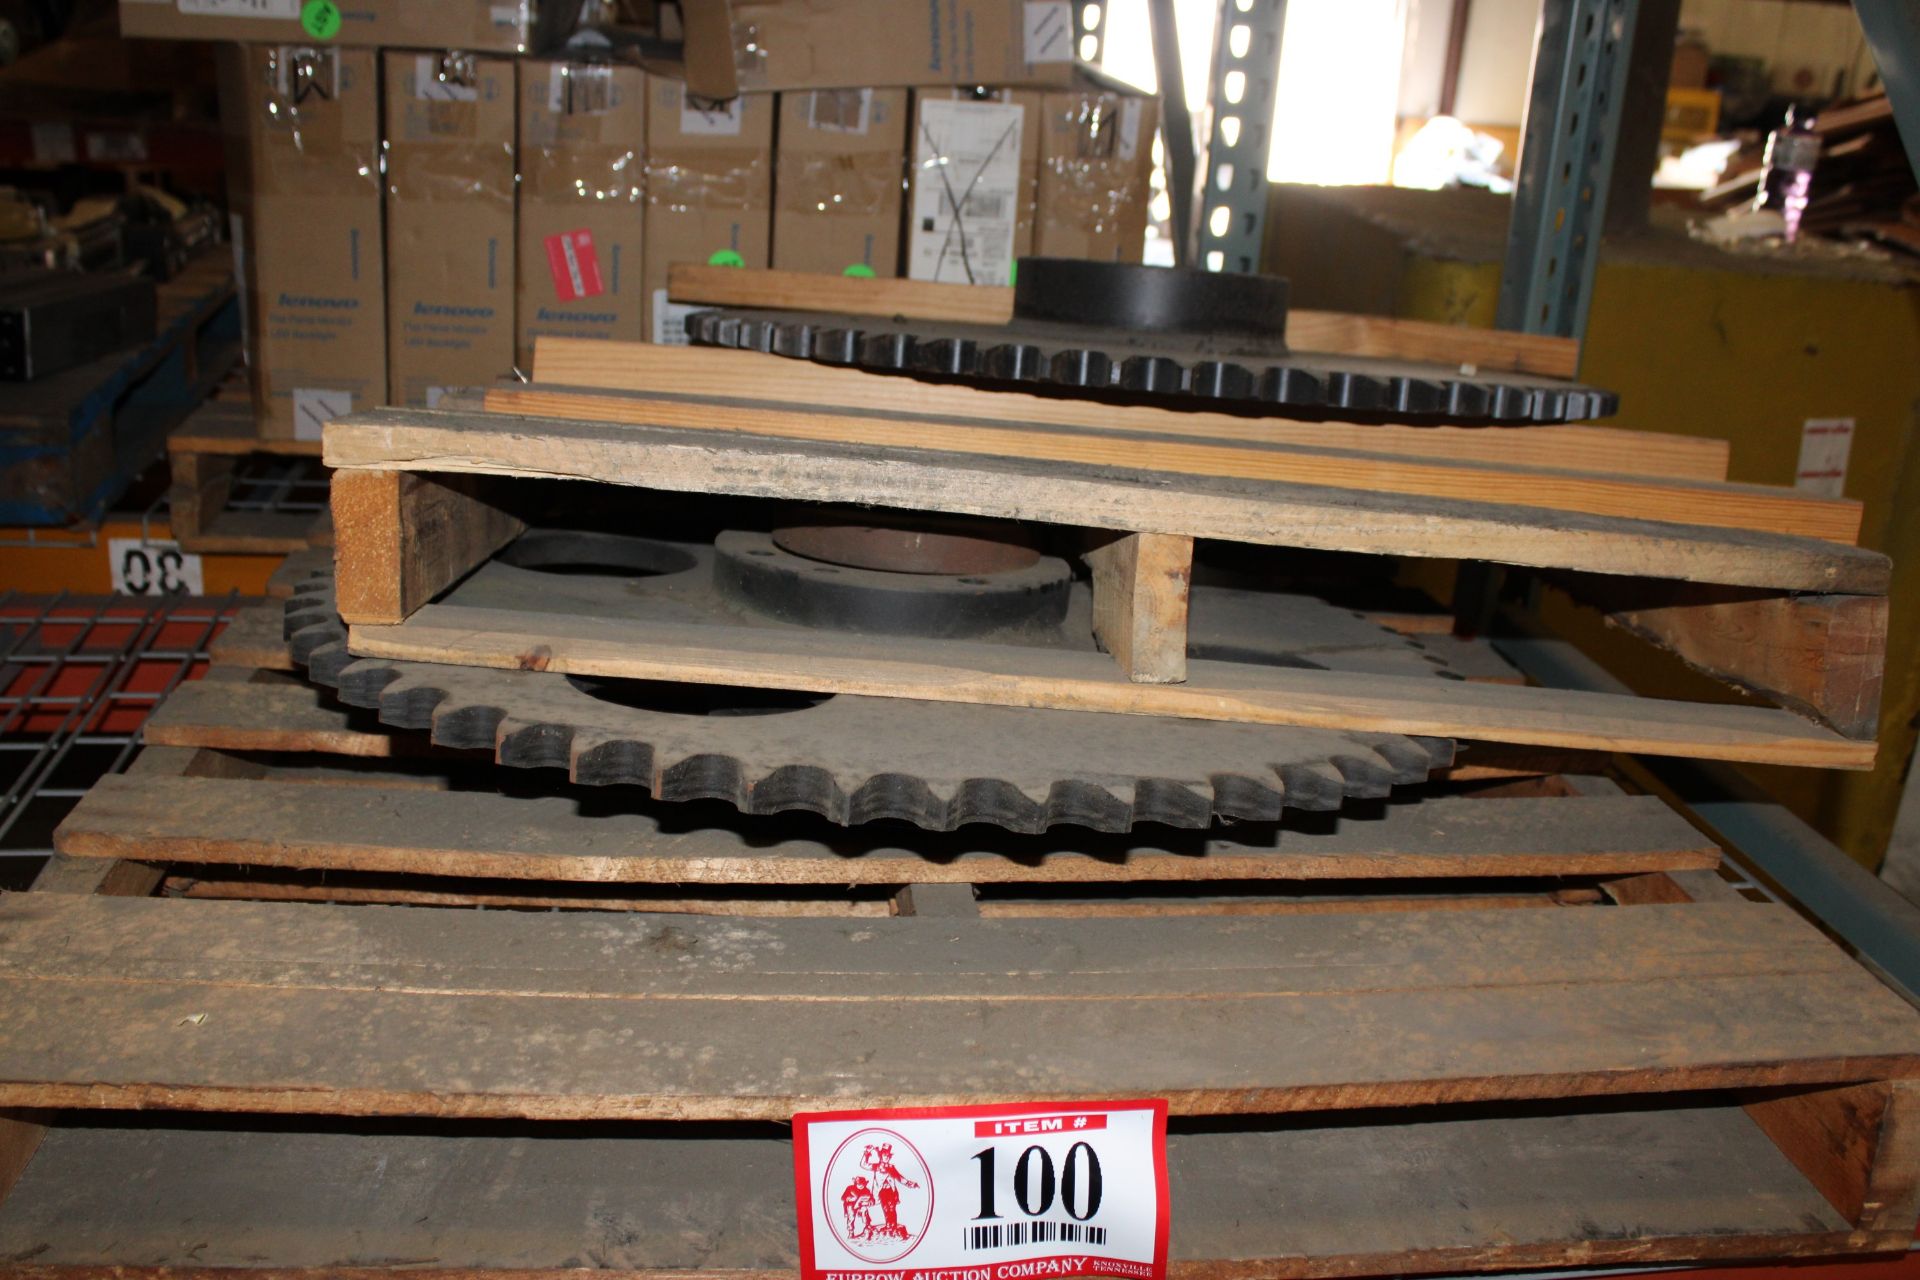 Contents of (2) Pallets: 2 Large Sprockets